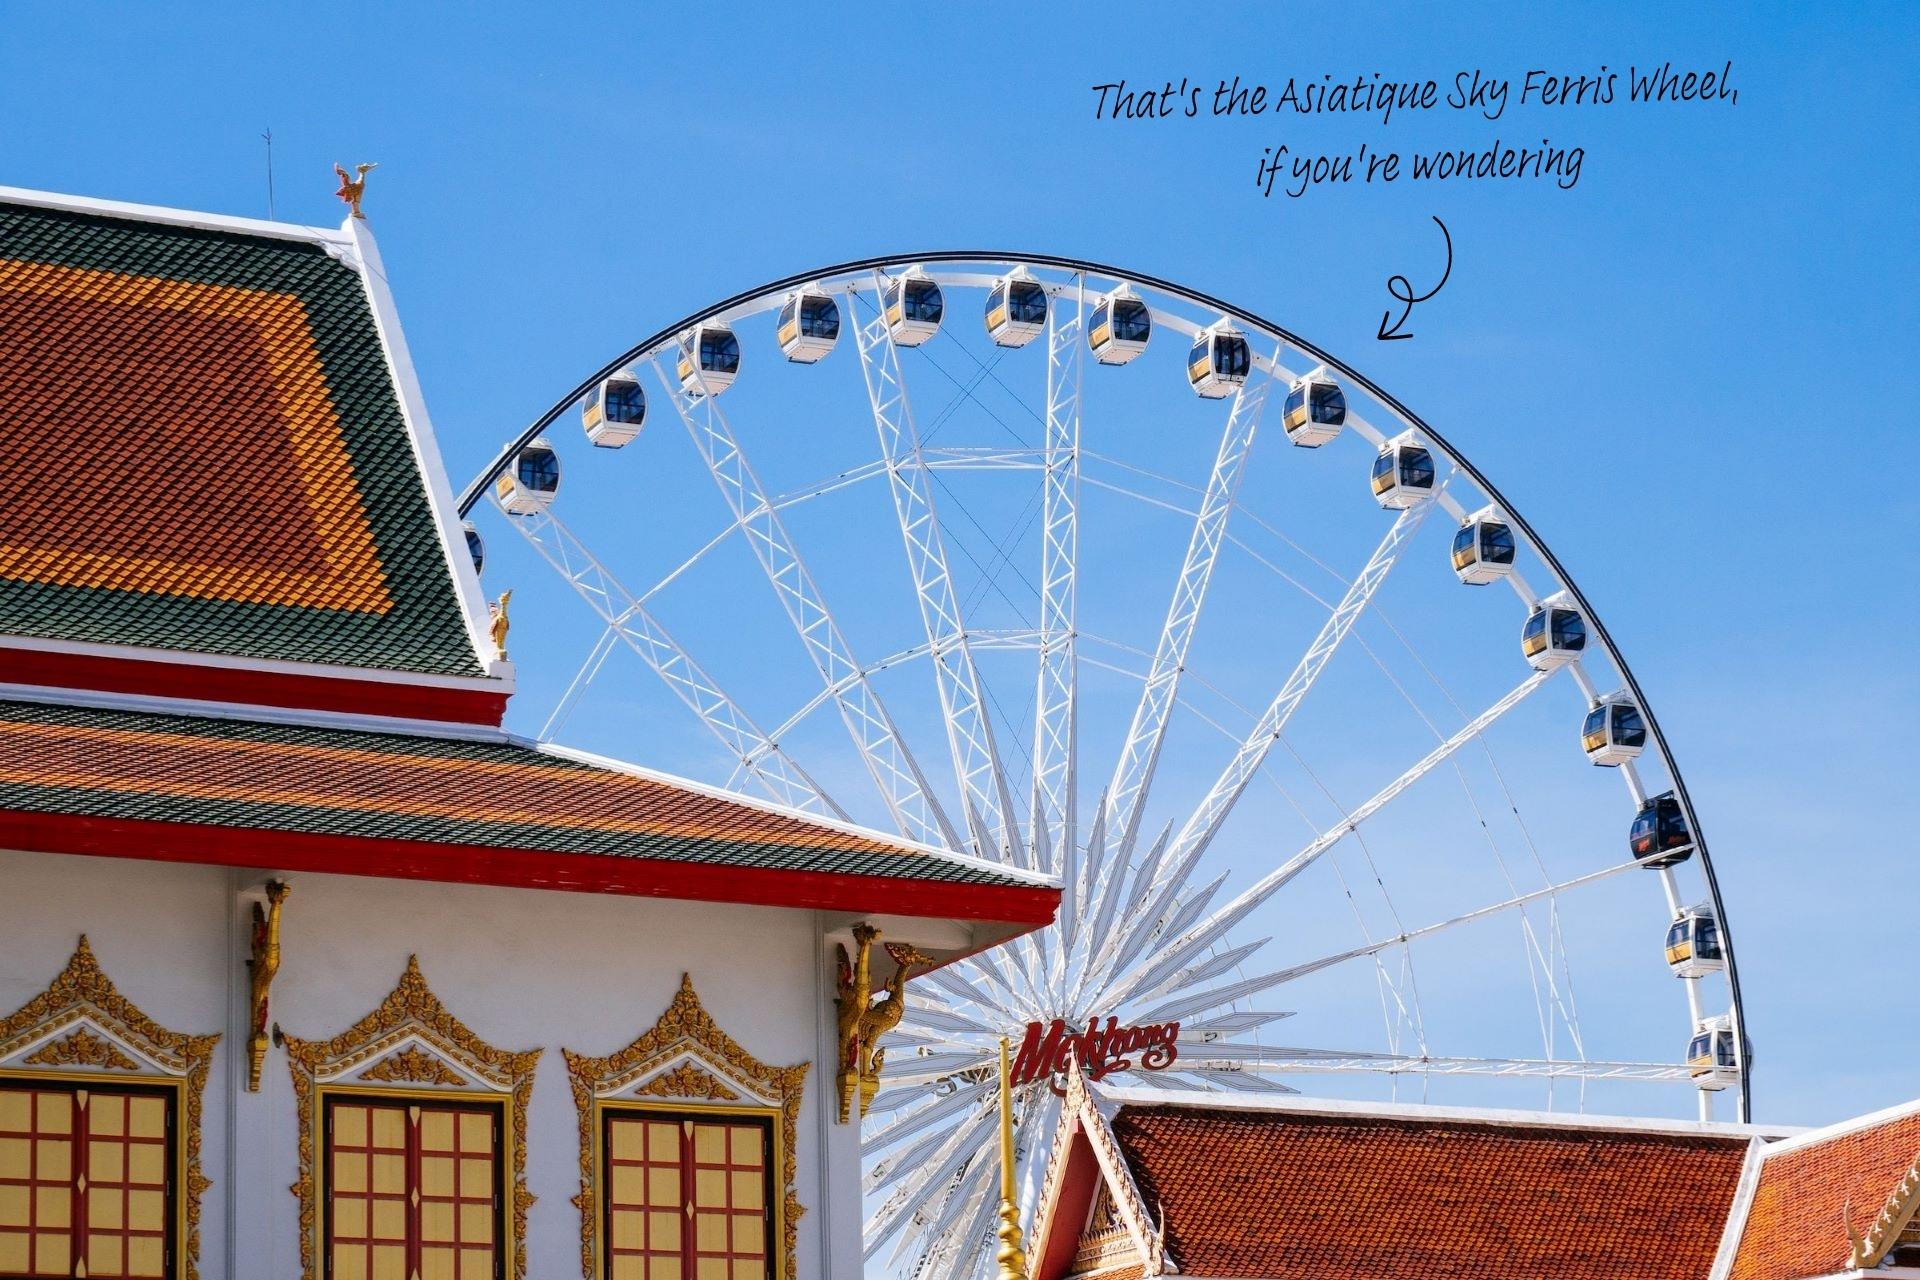 When is the best time to visit Bangkok? An image of the Asiatique Sky Ferris Wheel in Bangkok.